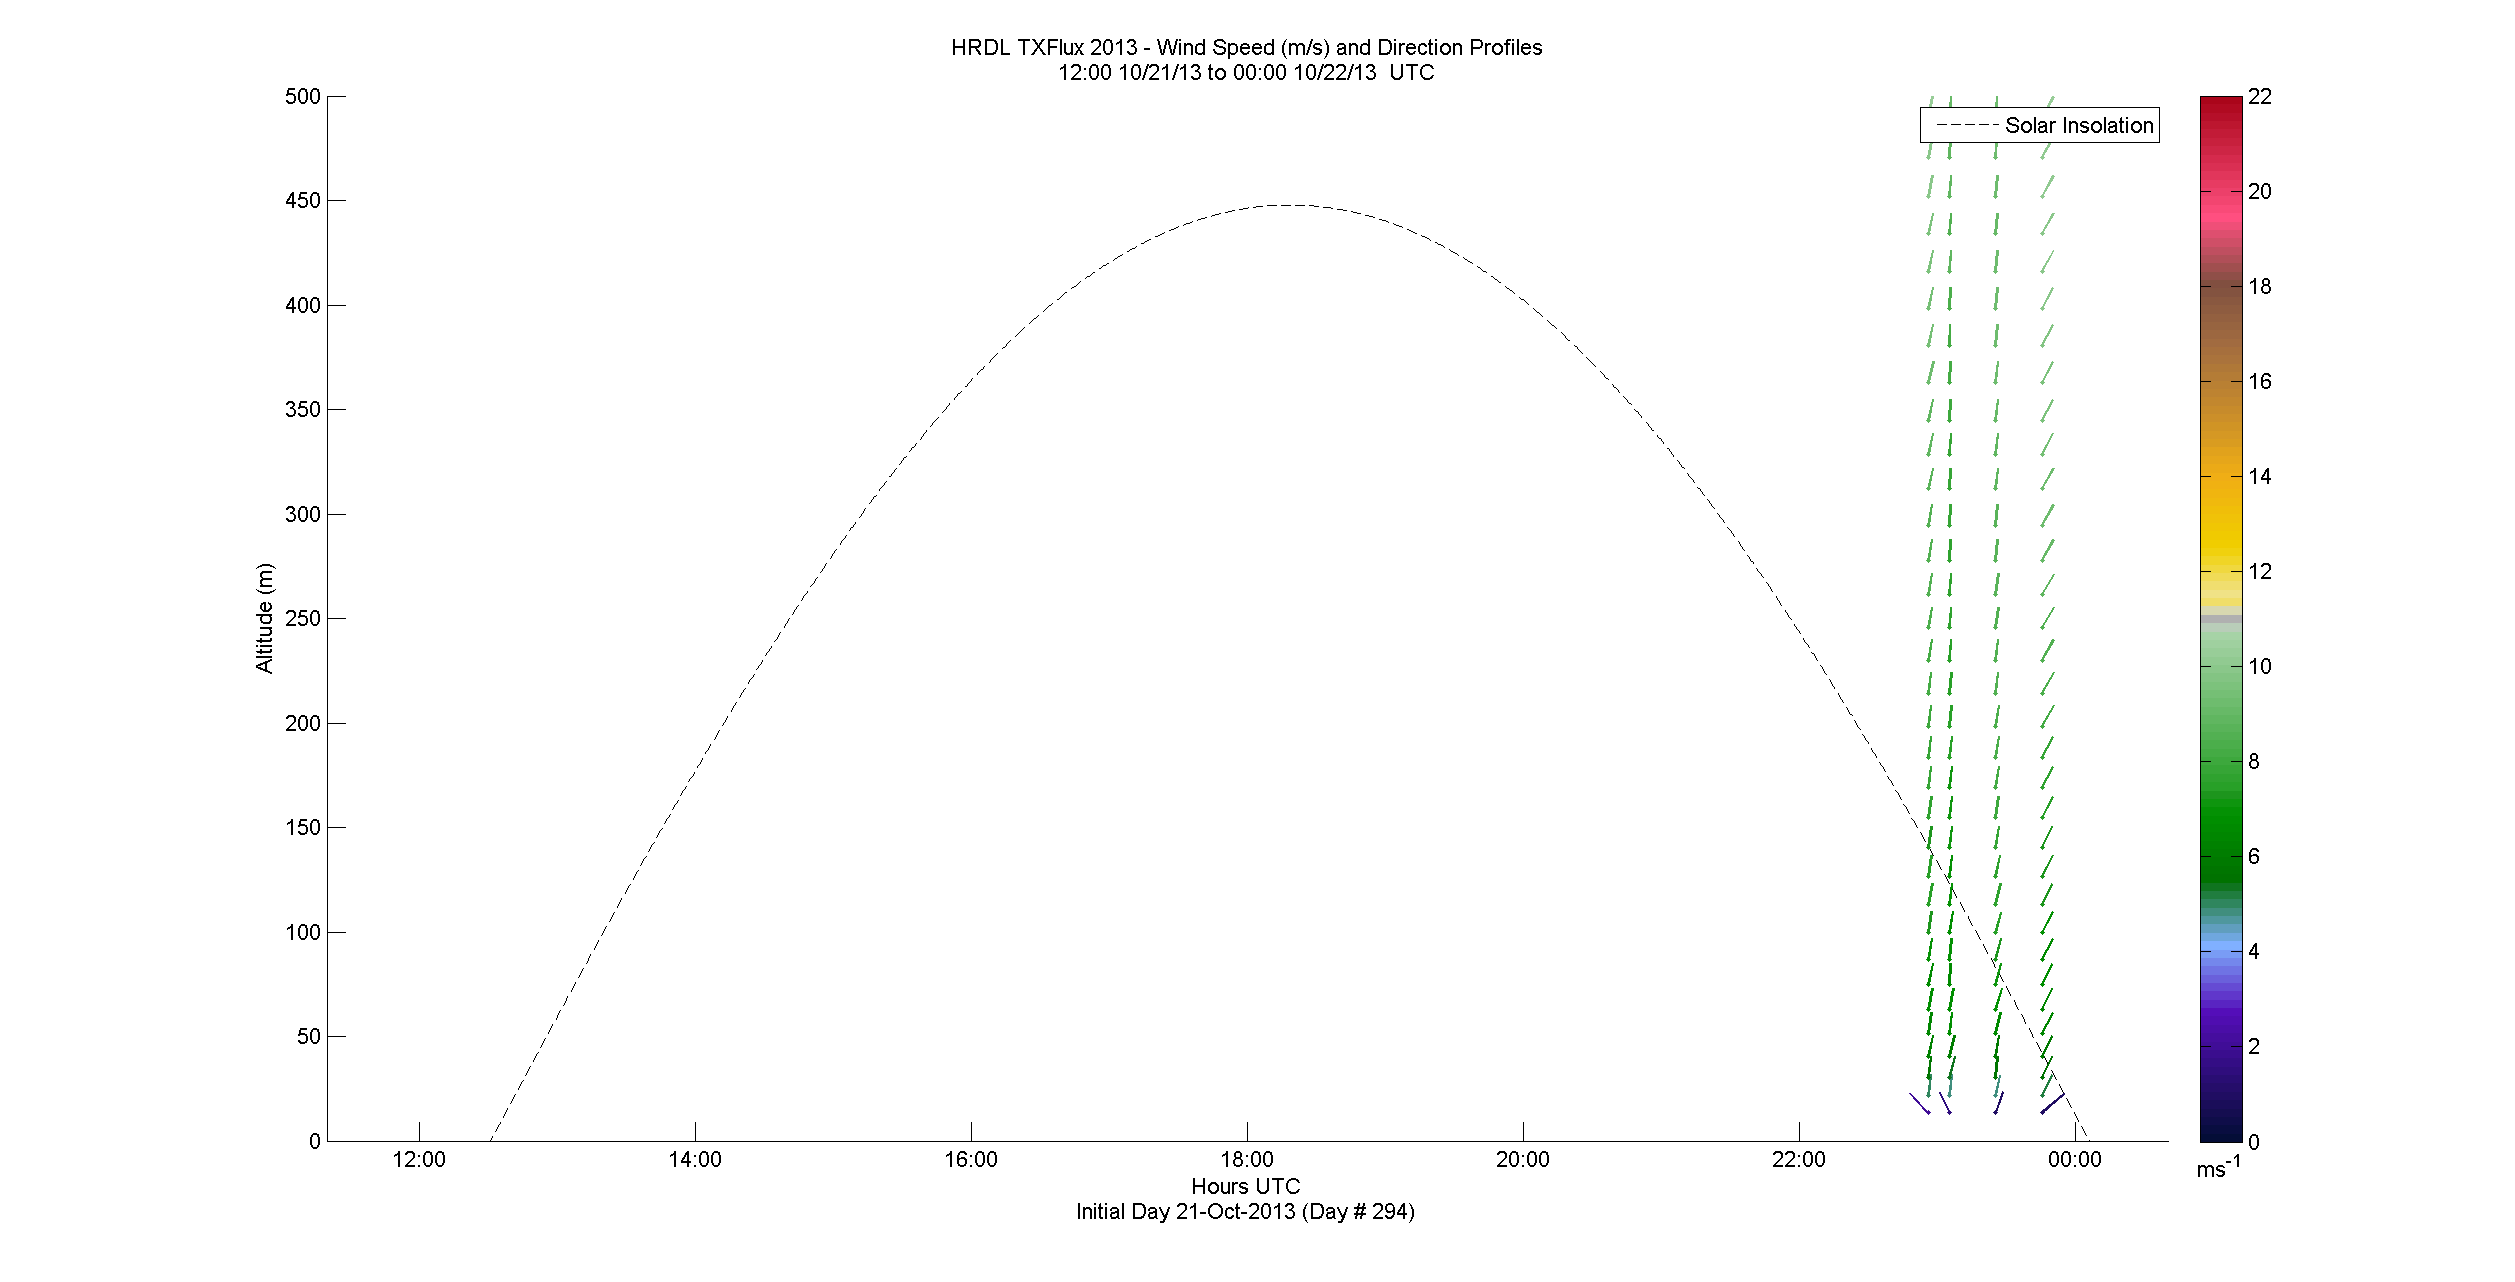 HRDL speed and direction profile - October 21 pm